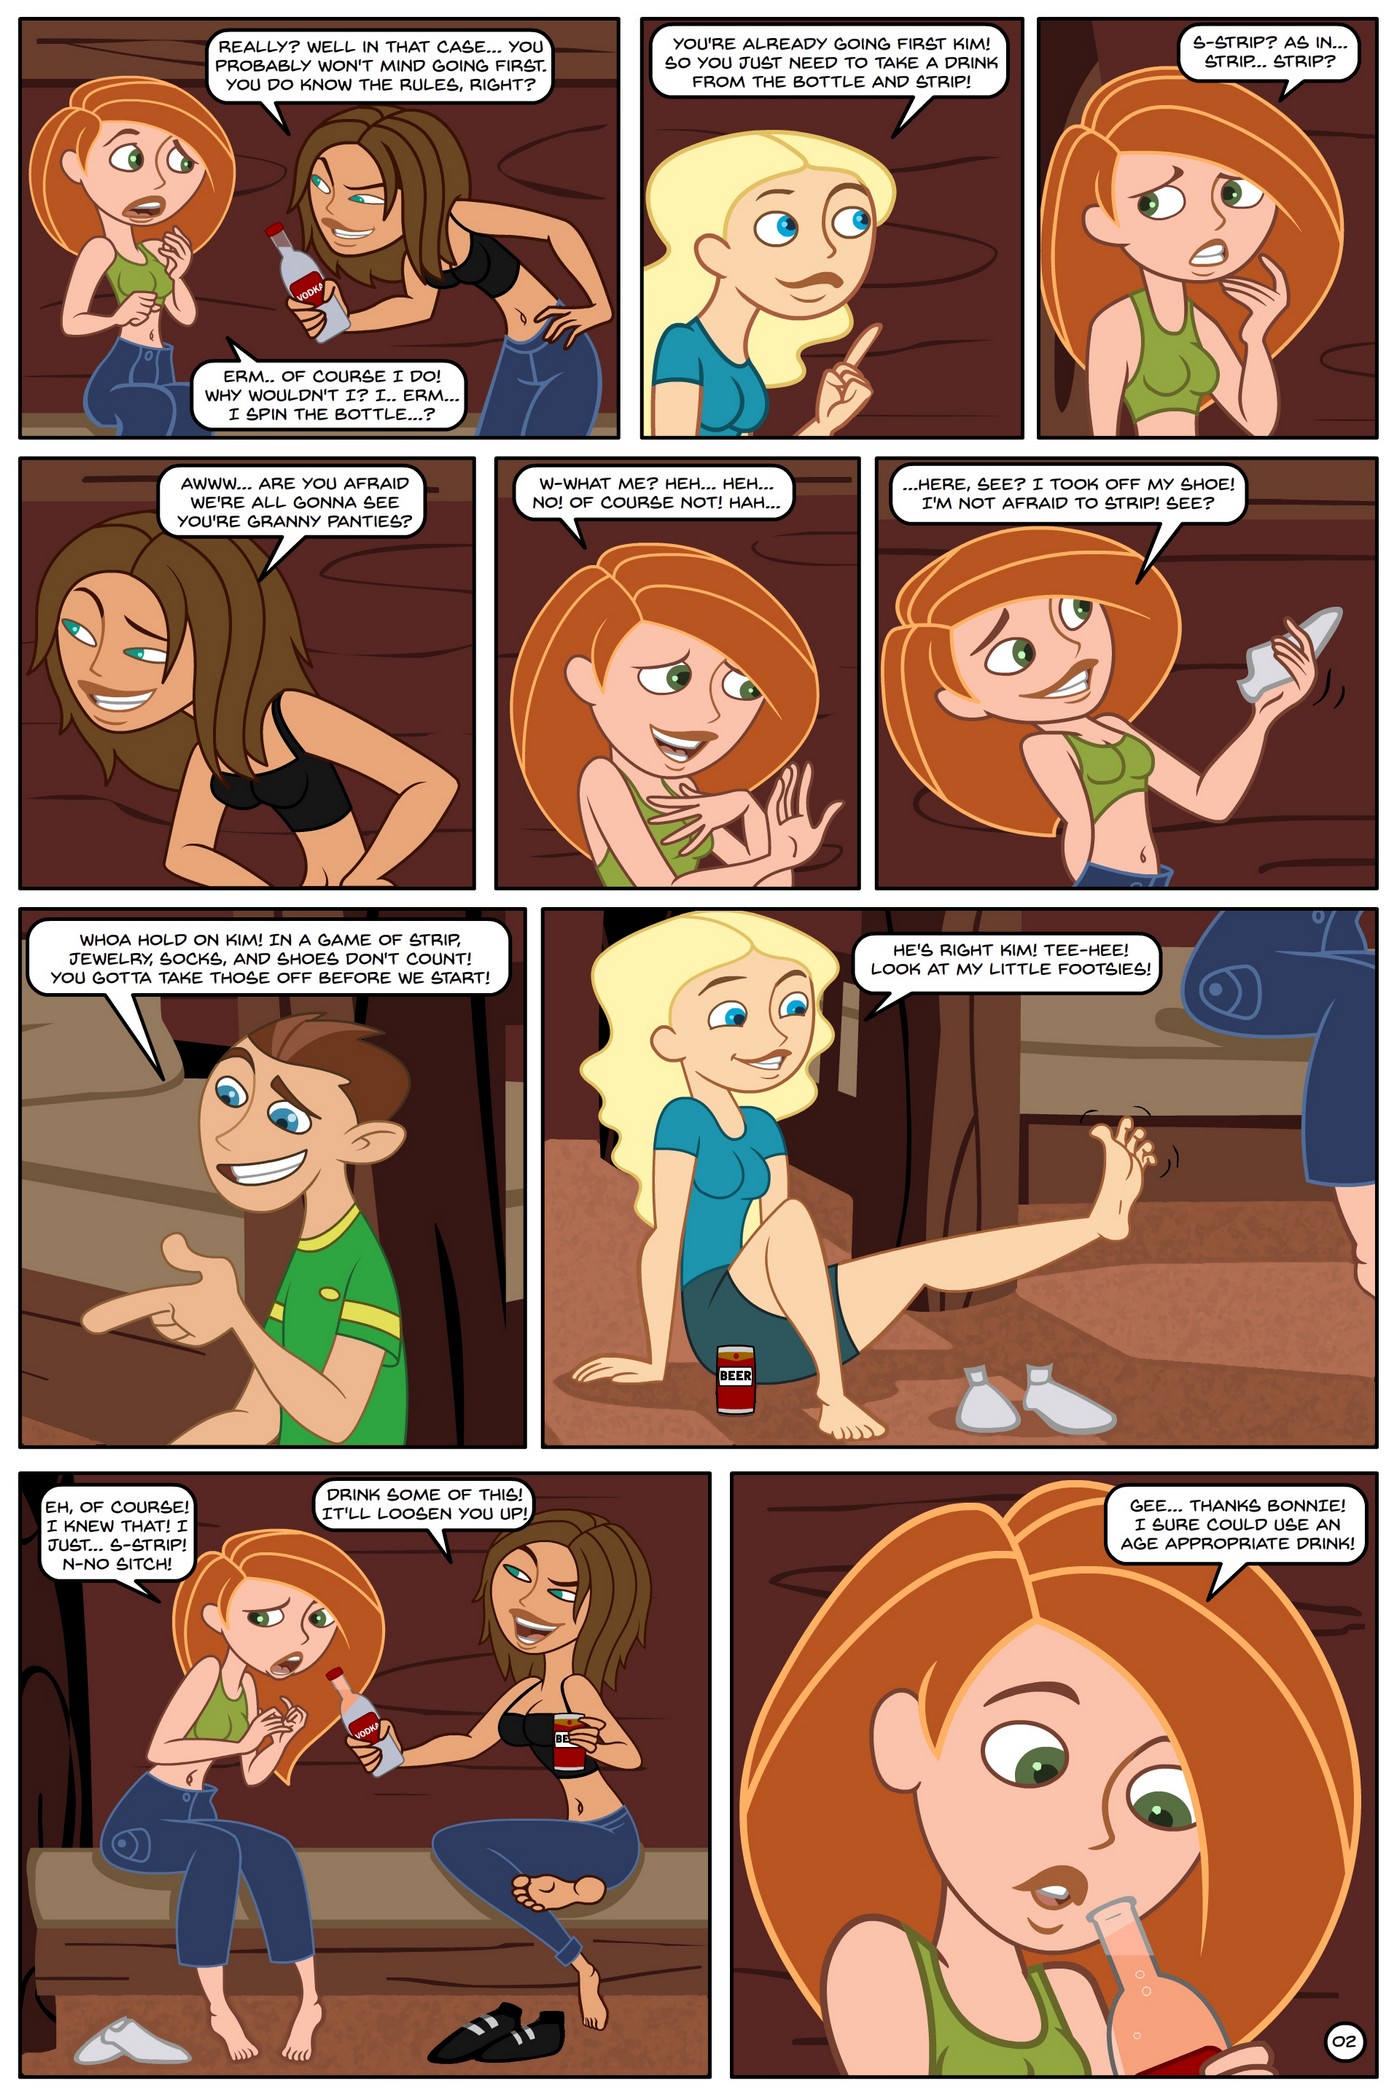 Kim Possible Spin, Sip & Strip! 03